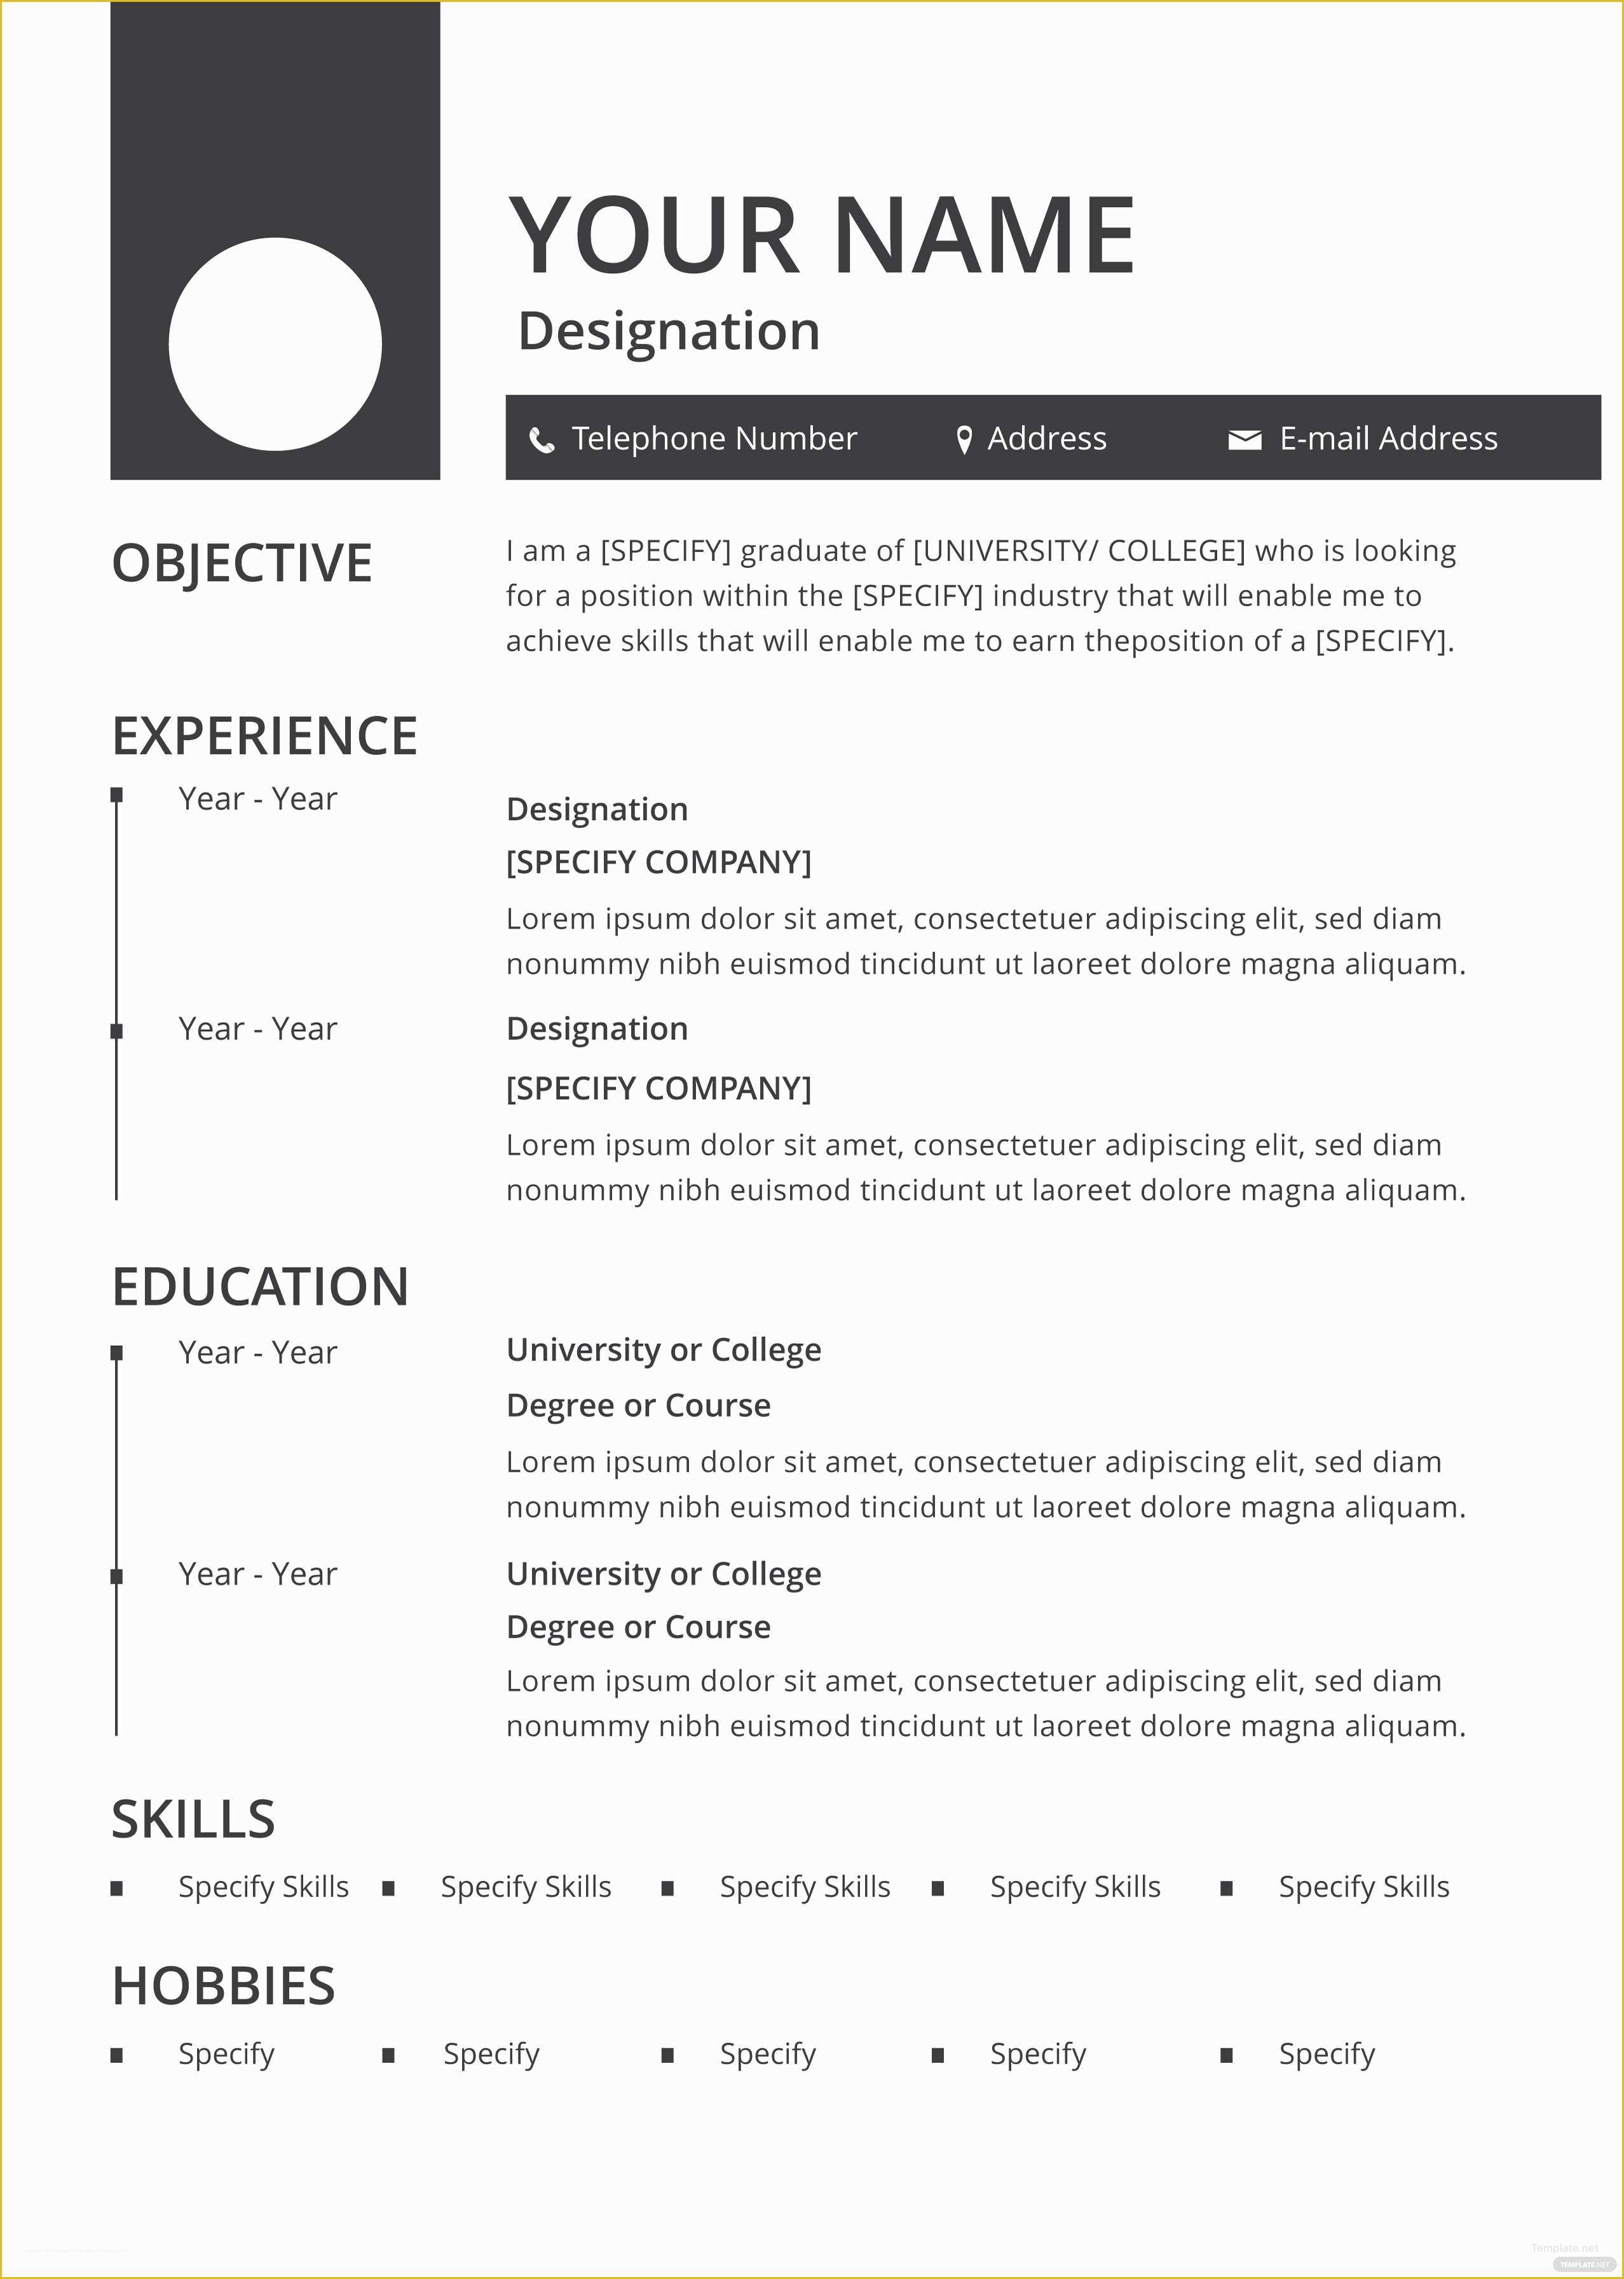 Free Online Cv Templates Of Free Blank Resume and Cv Template In Adobe Shop